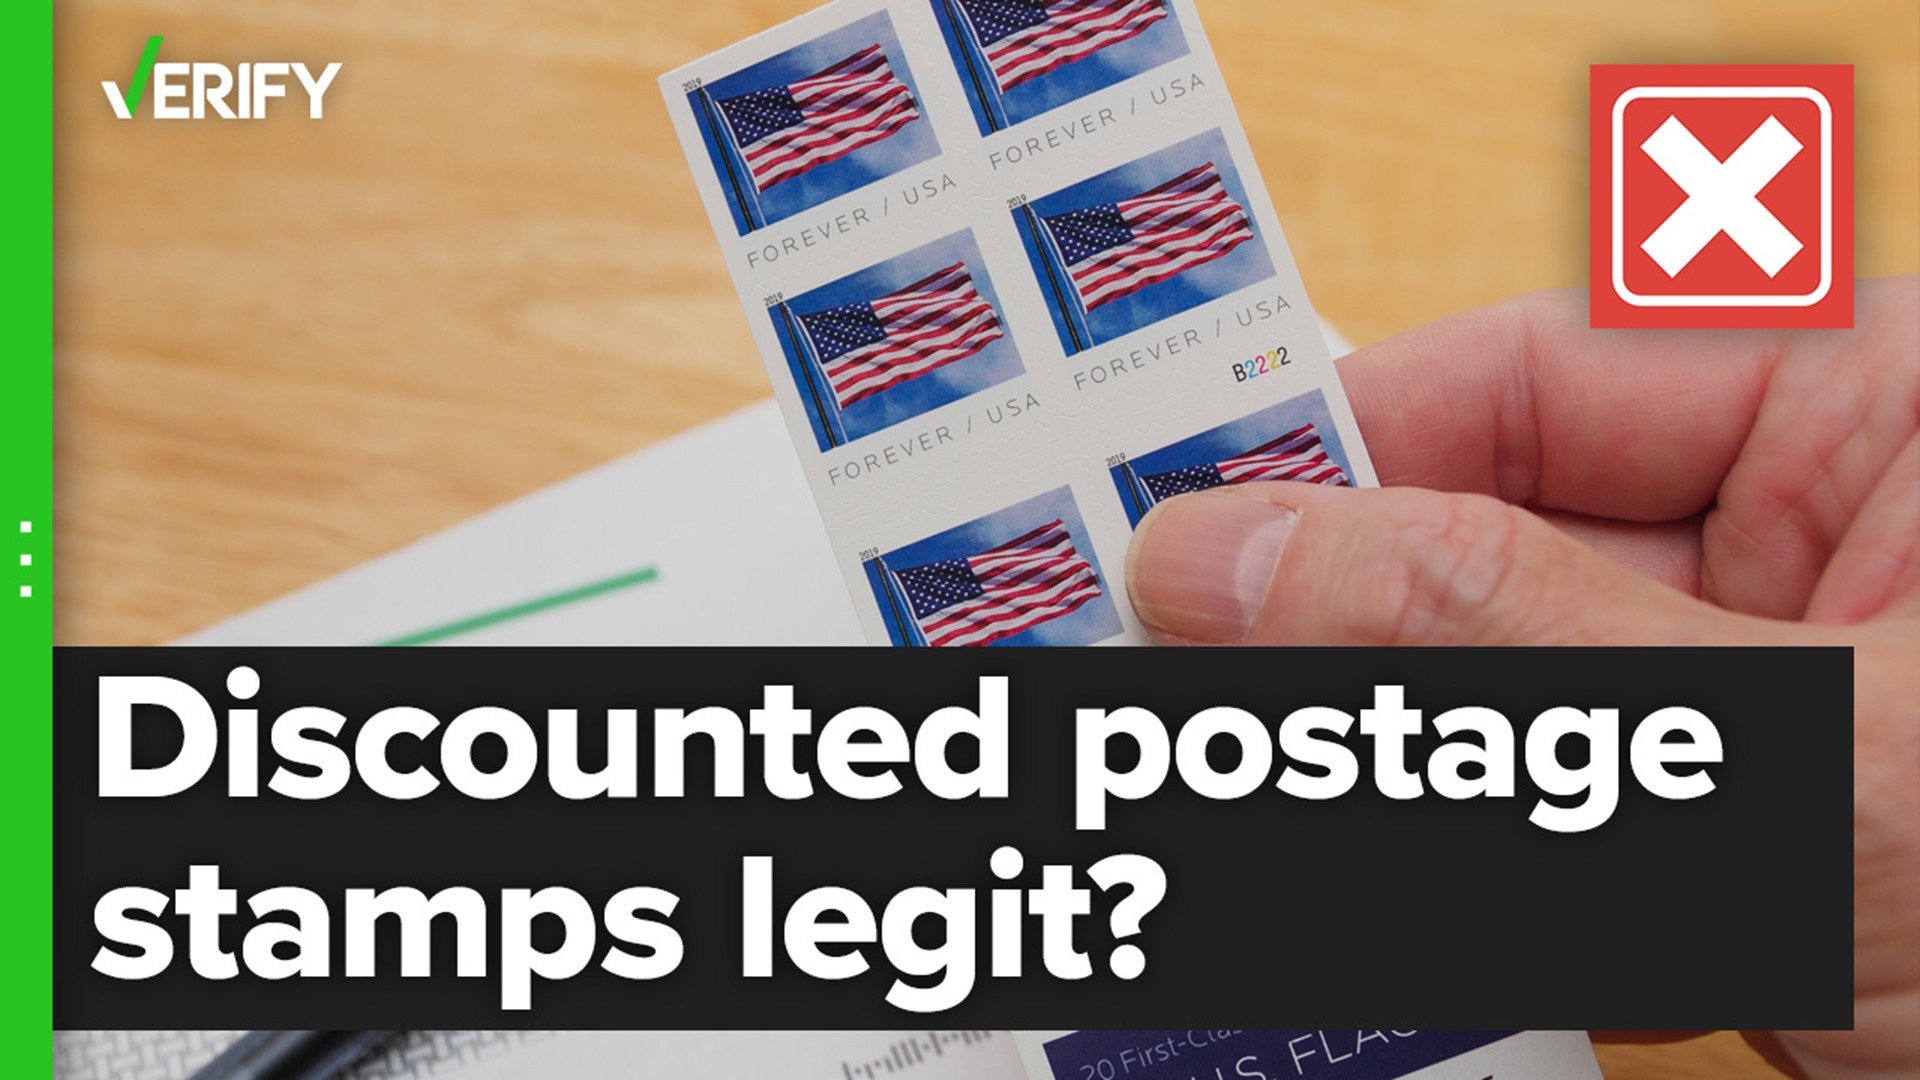 If it seems too good to be true, it probably is. A significant discount on stamps this holiday season is a “tell-tale sign” that they’re fake.